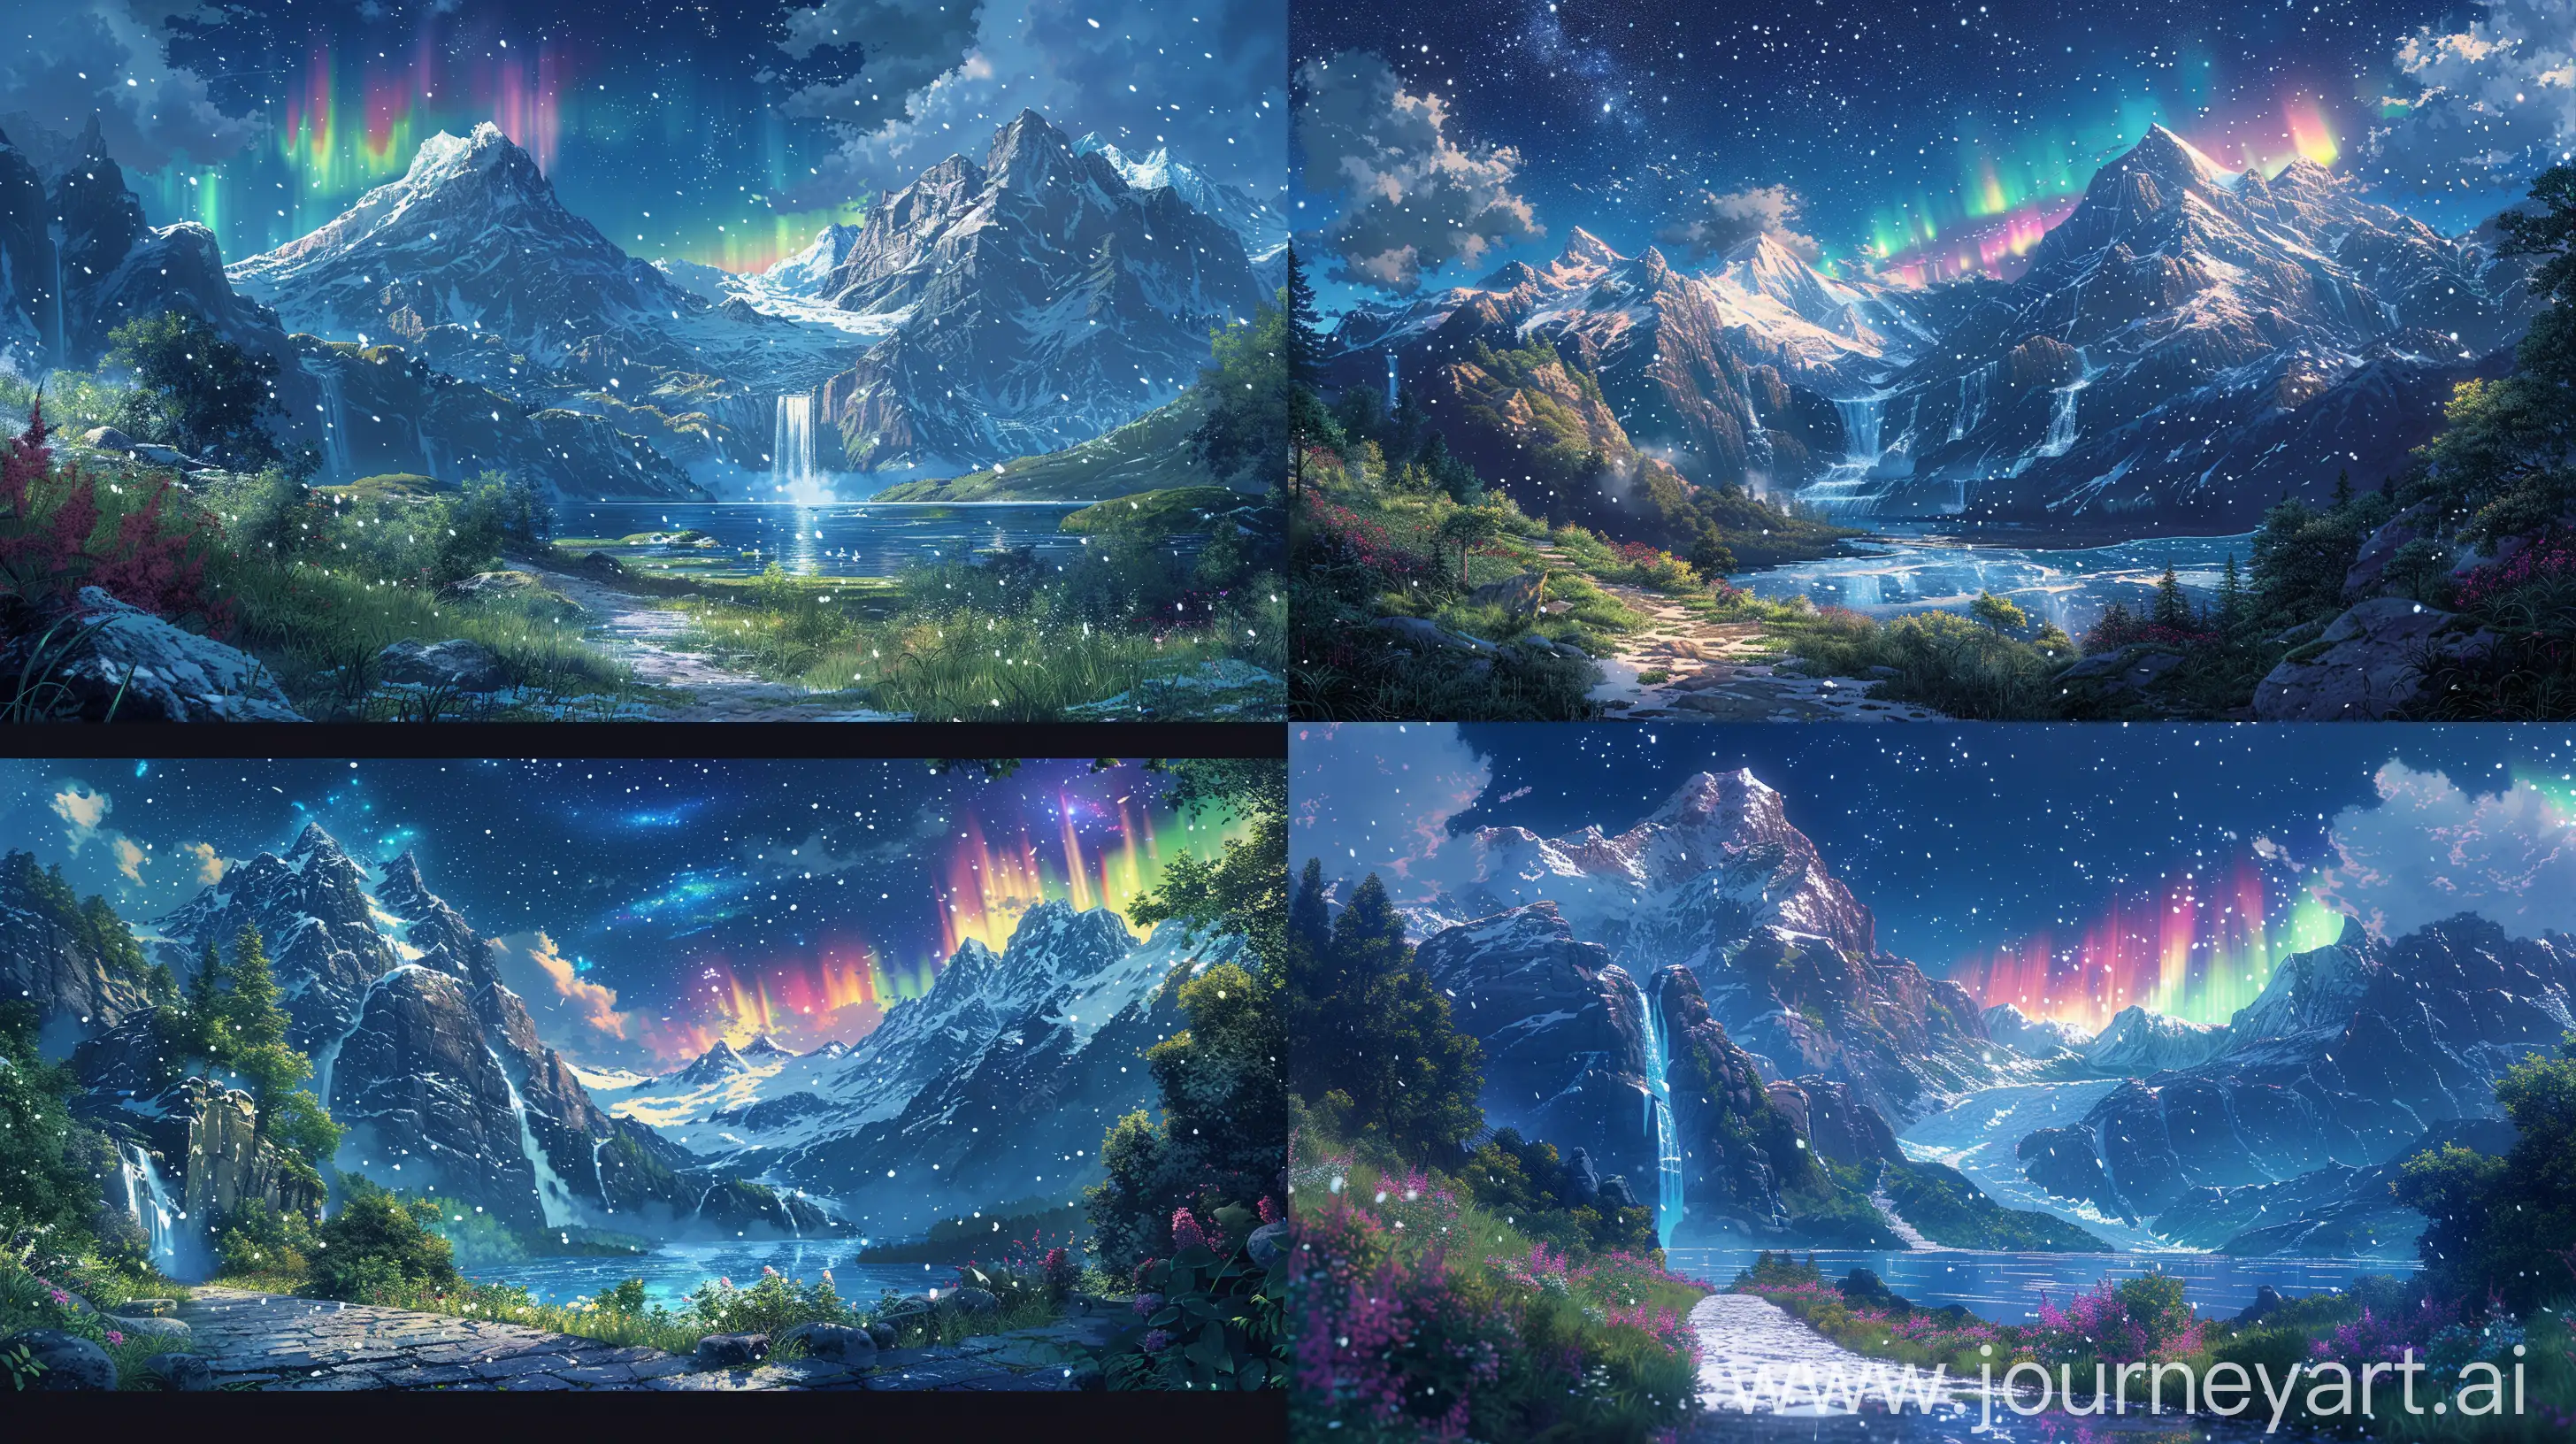 Beautiful anime scenary, illustration, mokoto shinkai and Ghibli style, direct front facade view of a path leading to mountains with snow, waterfalls and a giant lake. anime scenary, starry night sky with colorful northern lights, ultra HD, high quality, sharp details, no hyperrealistic --ar 16:9 --s 400